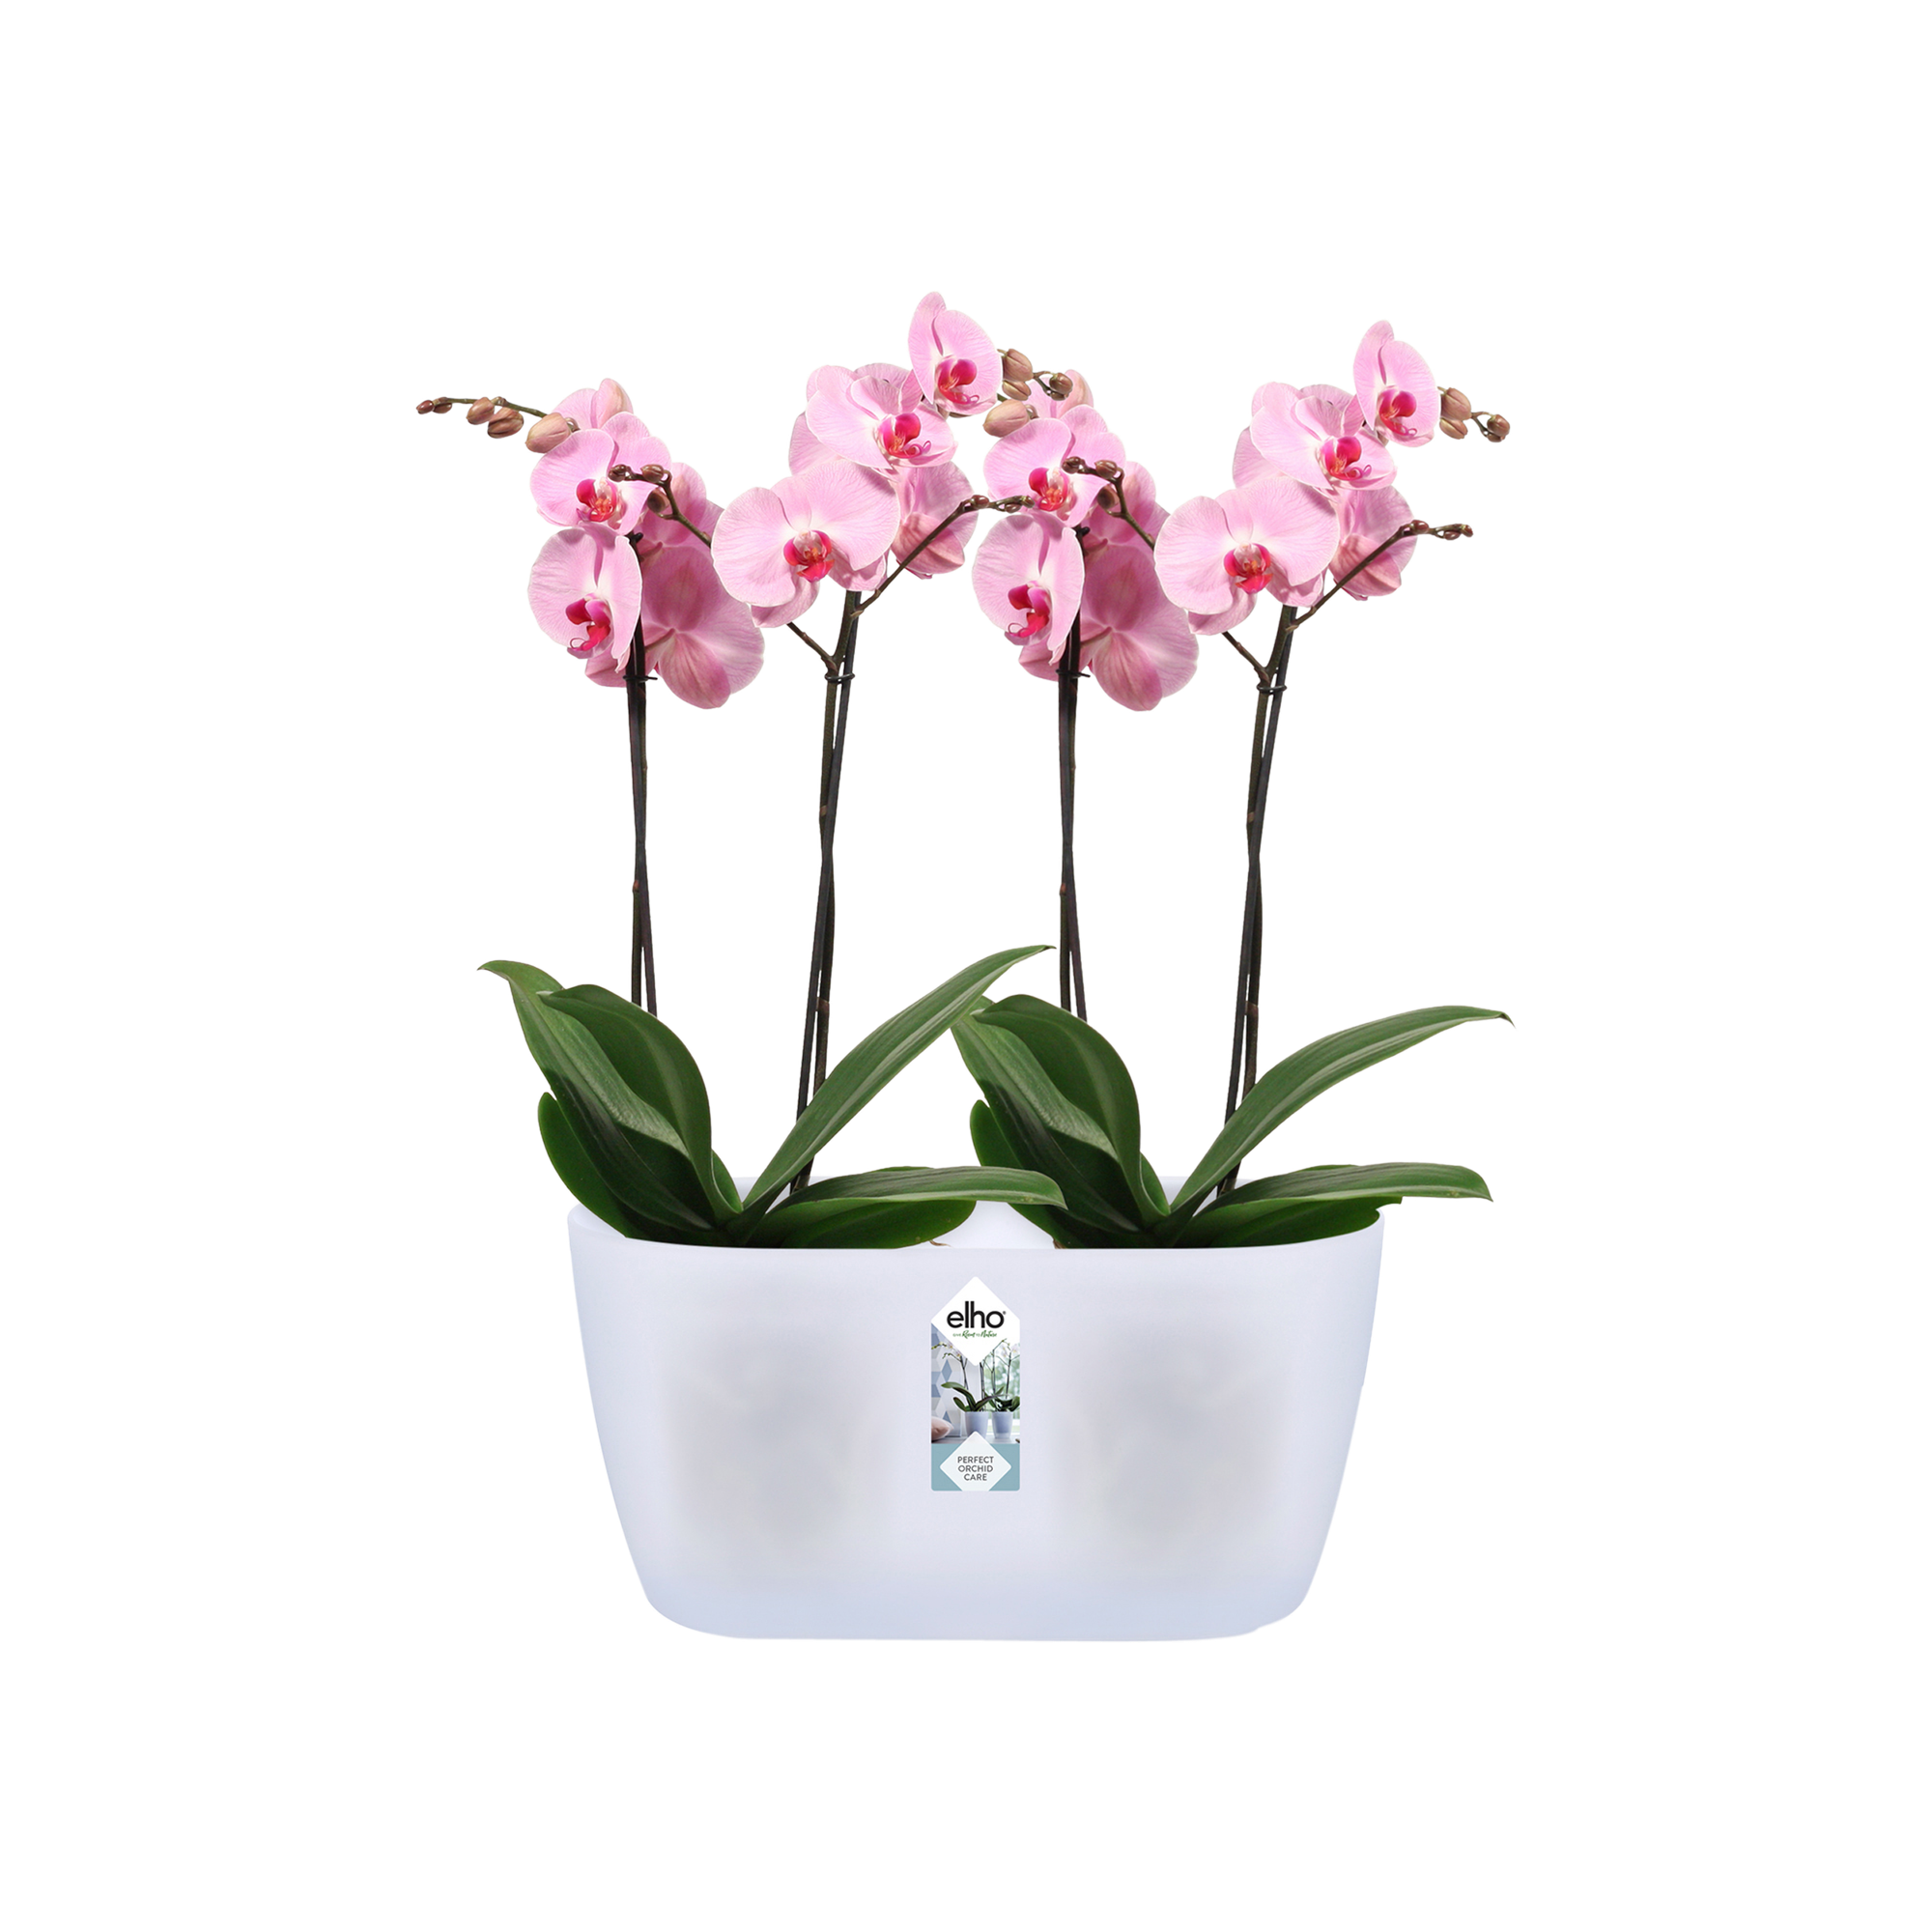 vervaldatum zone optocht brussels orchidee duo 25cm transparant - elho® - Give room to nature